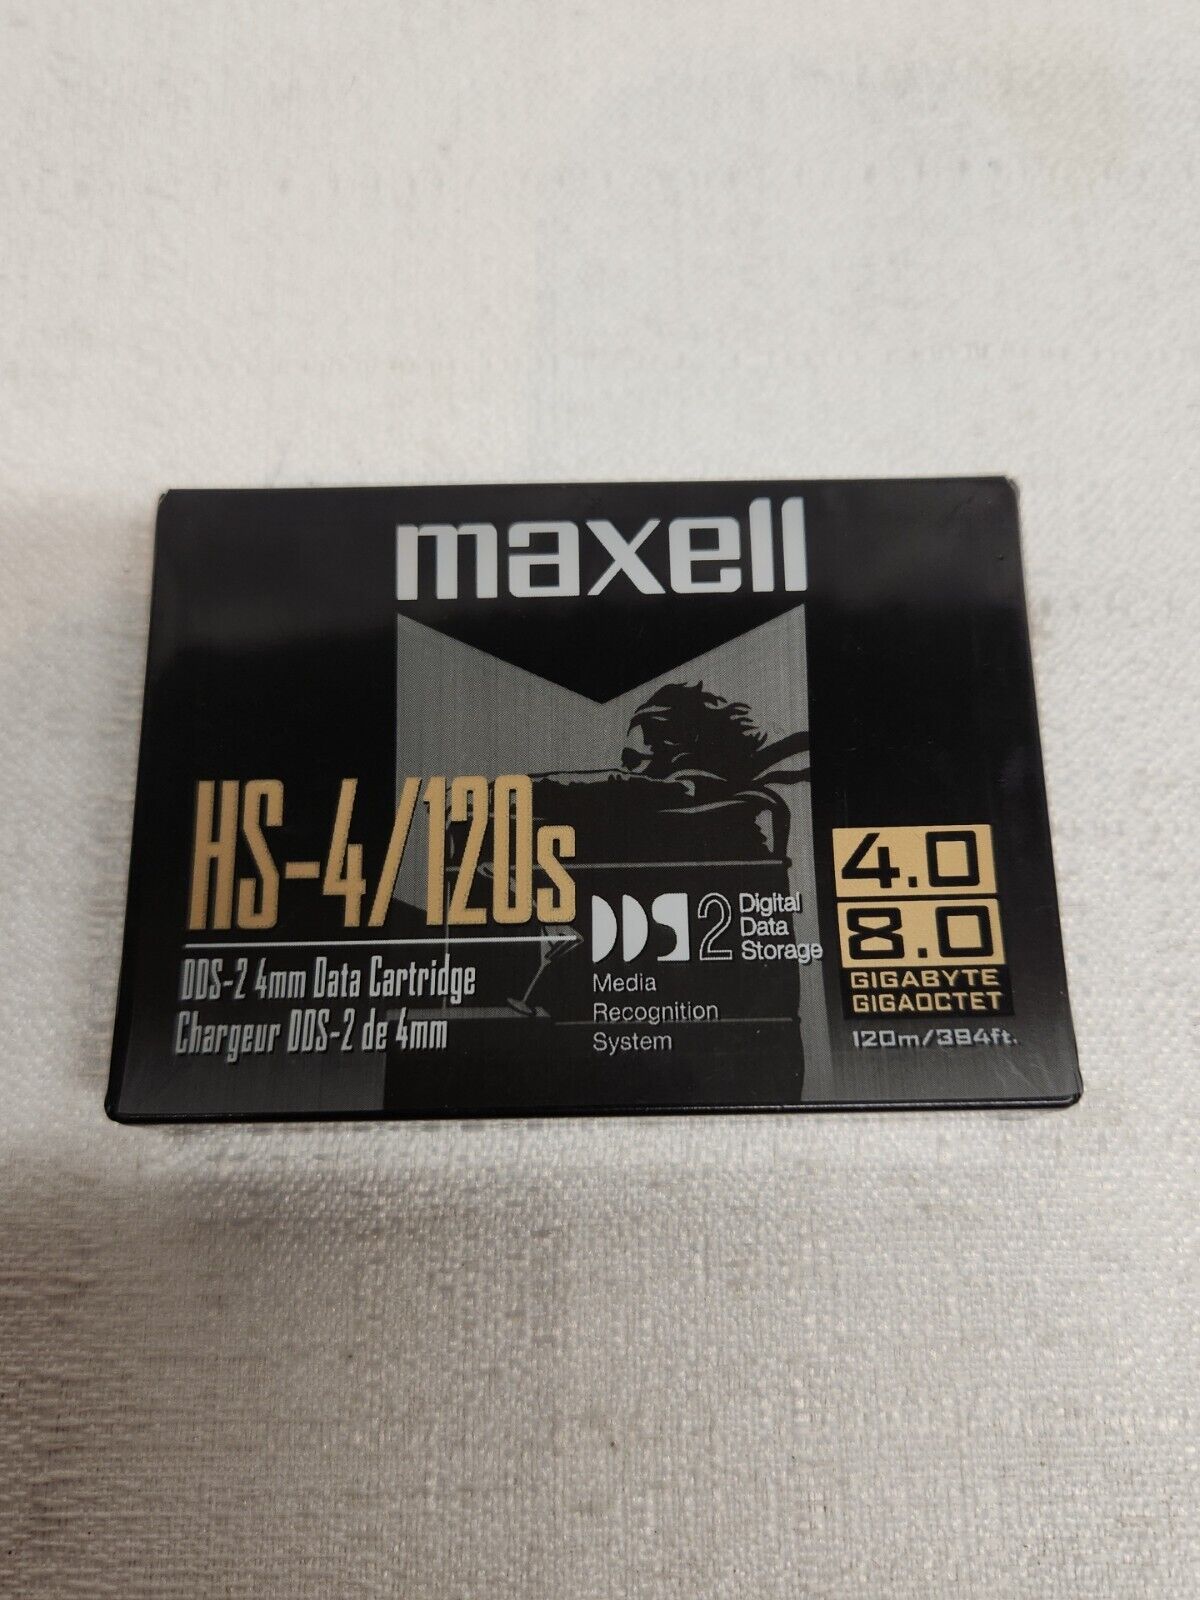 NEW 1 Pack of Maxell HS-4/120s Data Cartridge DDS-2 4mm Cartridge